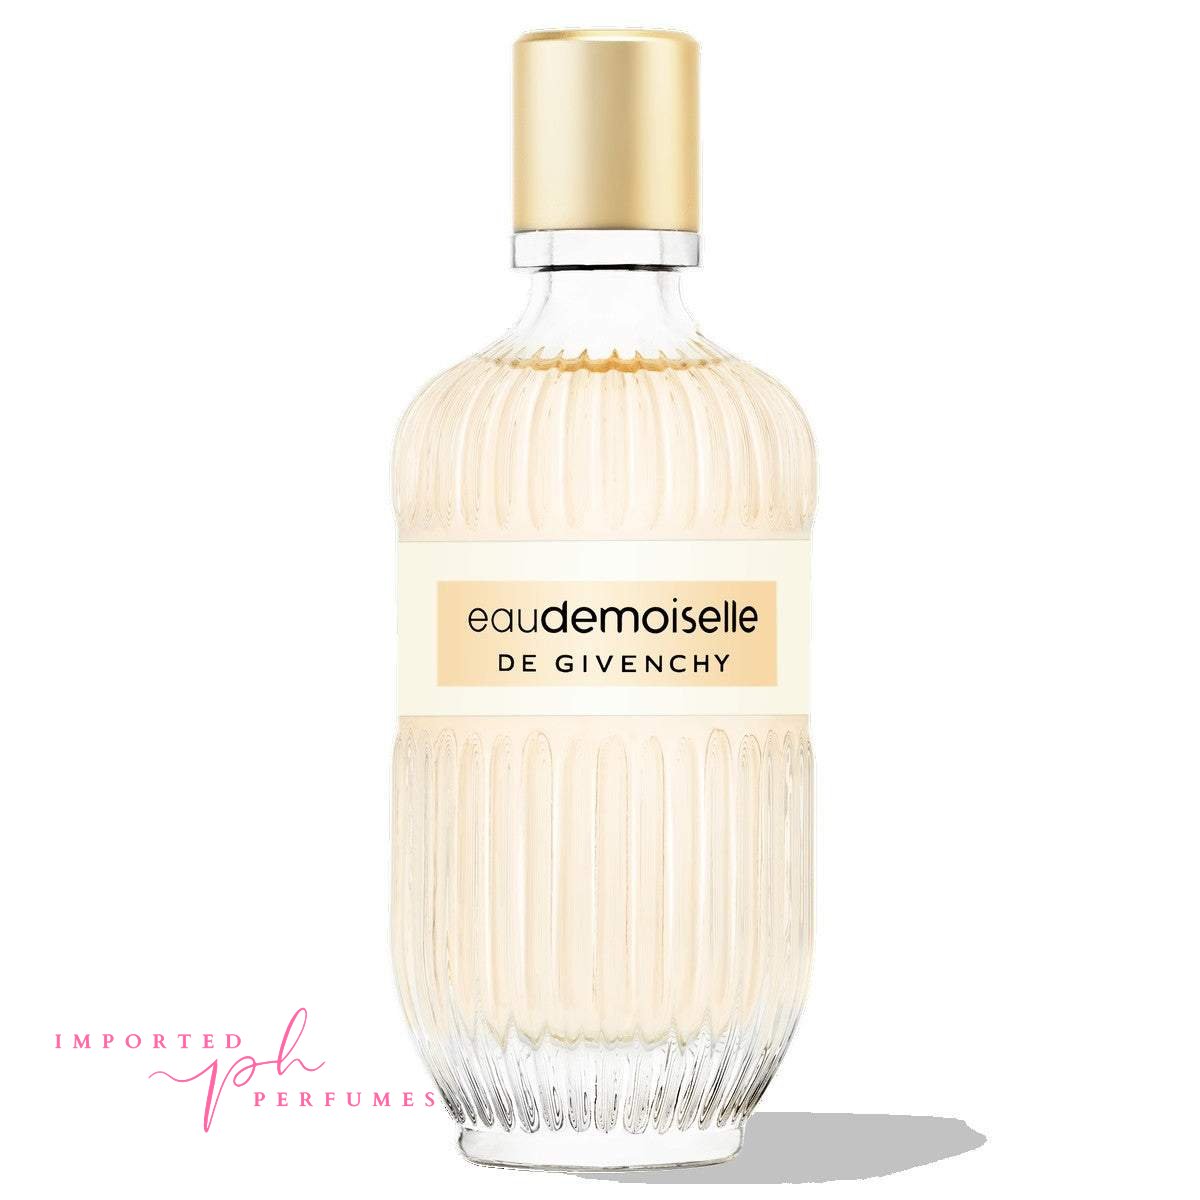 Eaudemoiselle De Givenchy For Women By Givenchy EDT 100ml-Imported Perfumes Co-Eaudemoiselle,Eaudemoiselle Givenchy,For Women,Givenchy,Women,Women Perfume